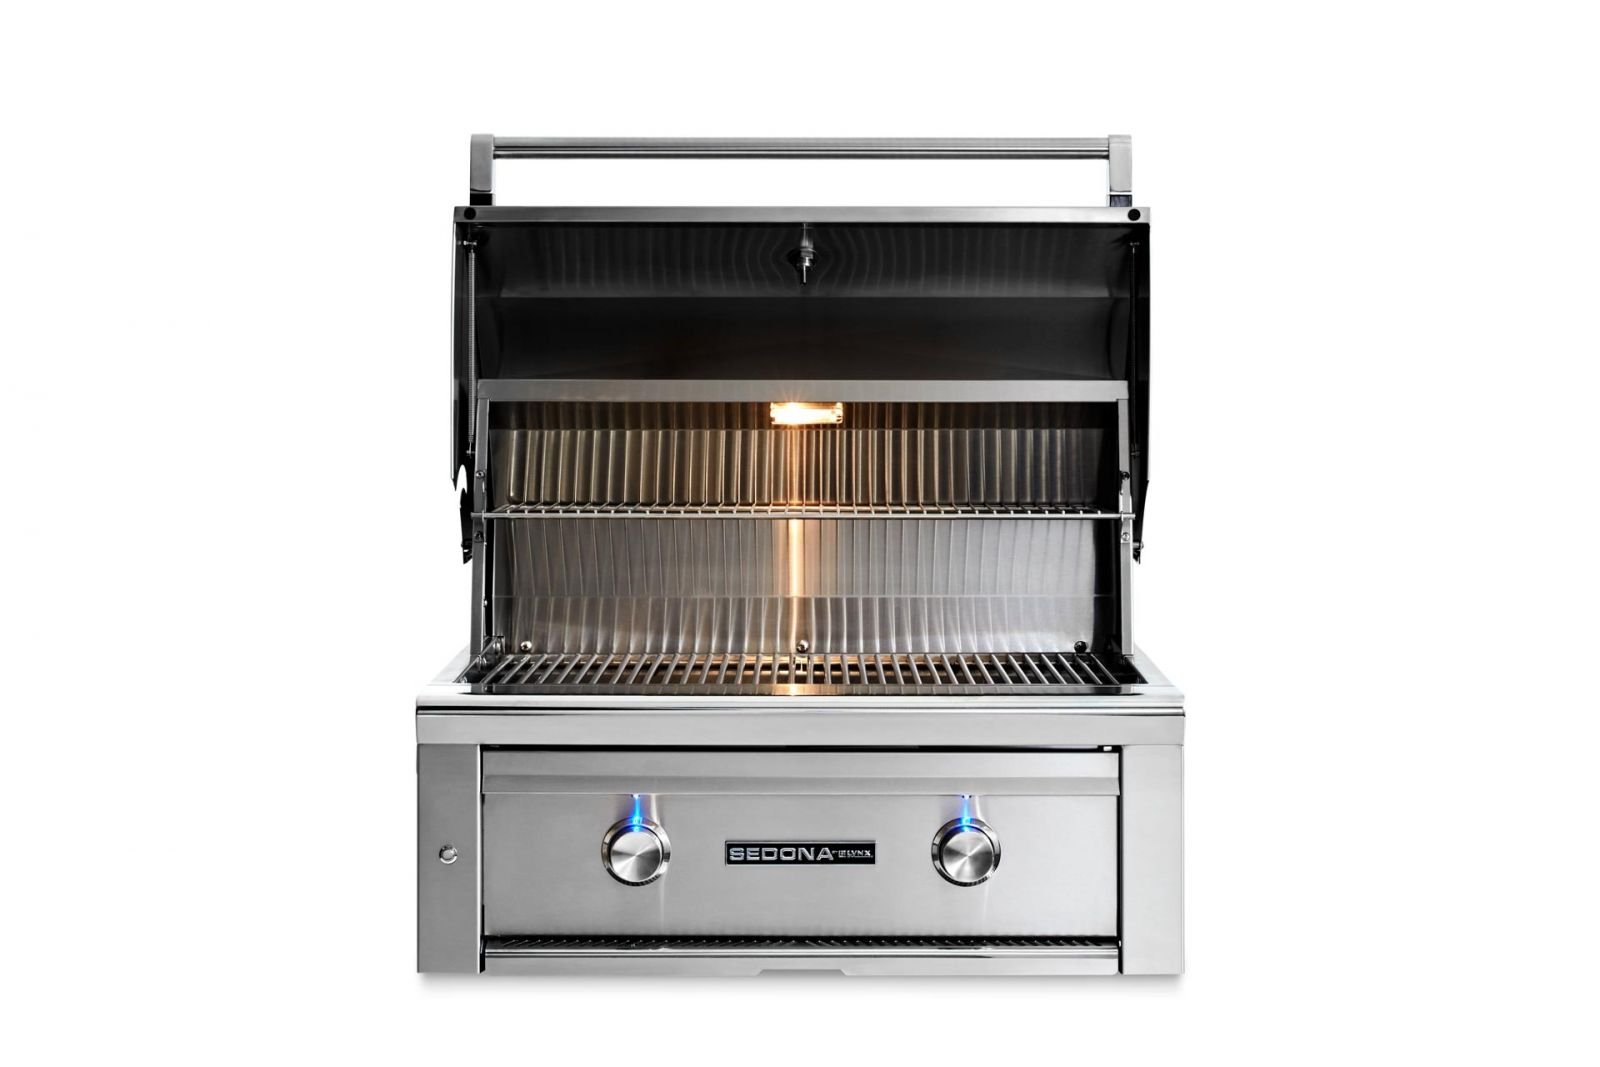 30" Built-in Grill with 2 Stainless Steel Burners (L500)